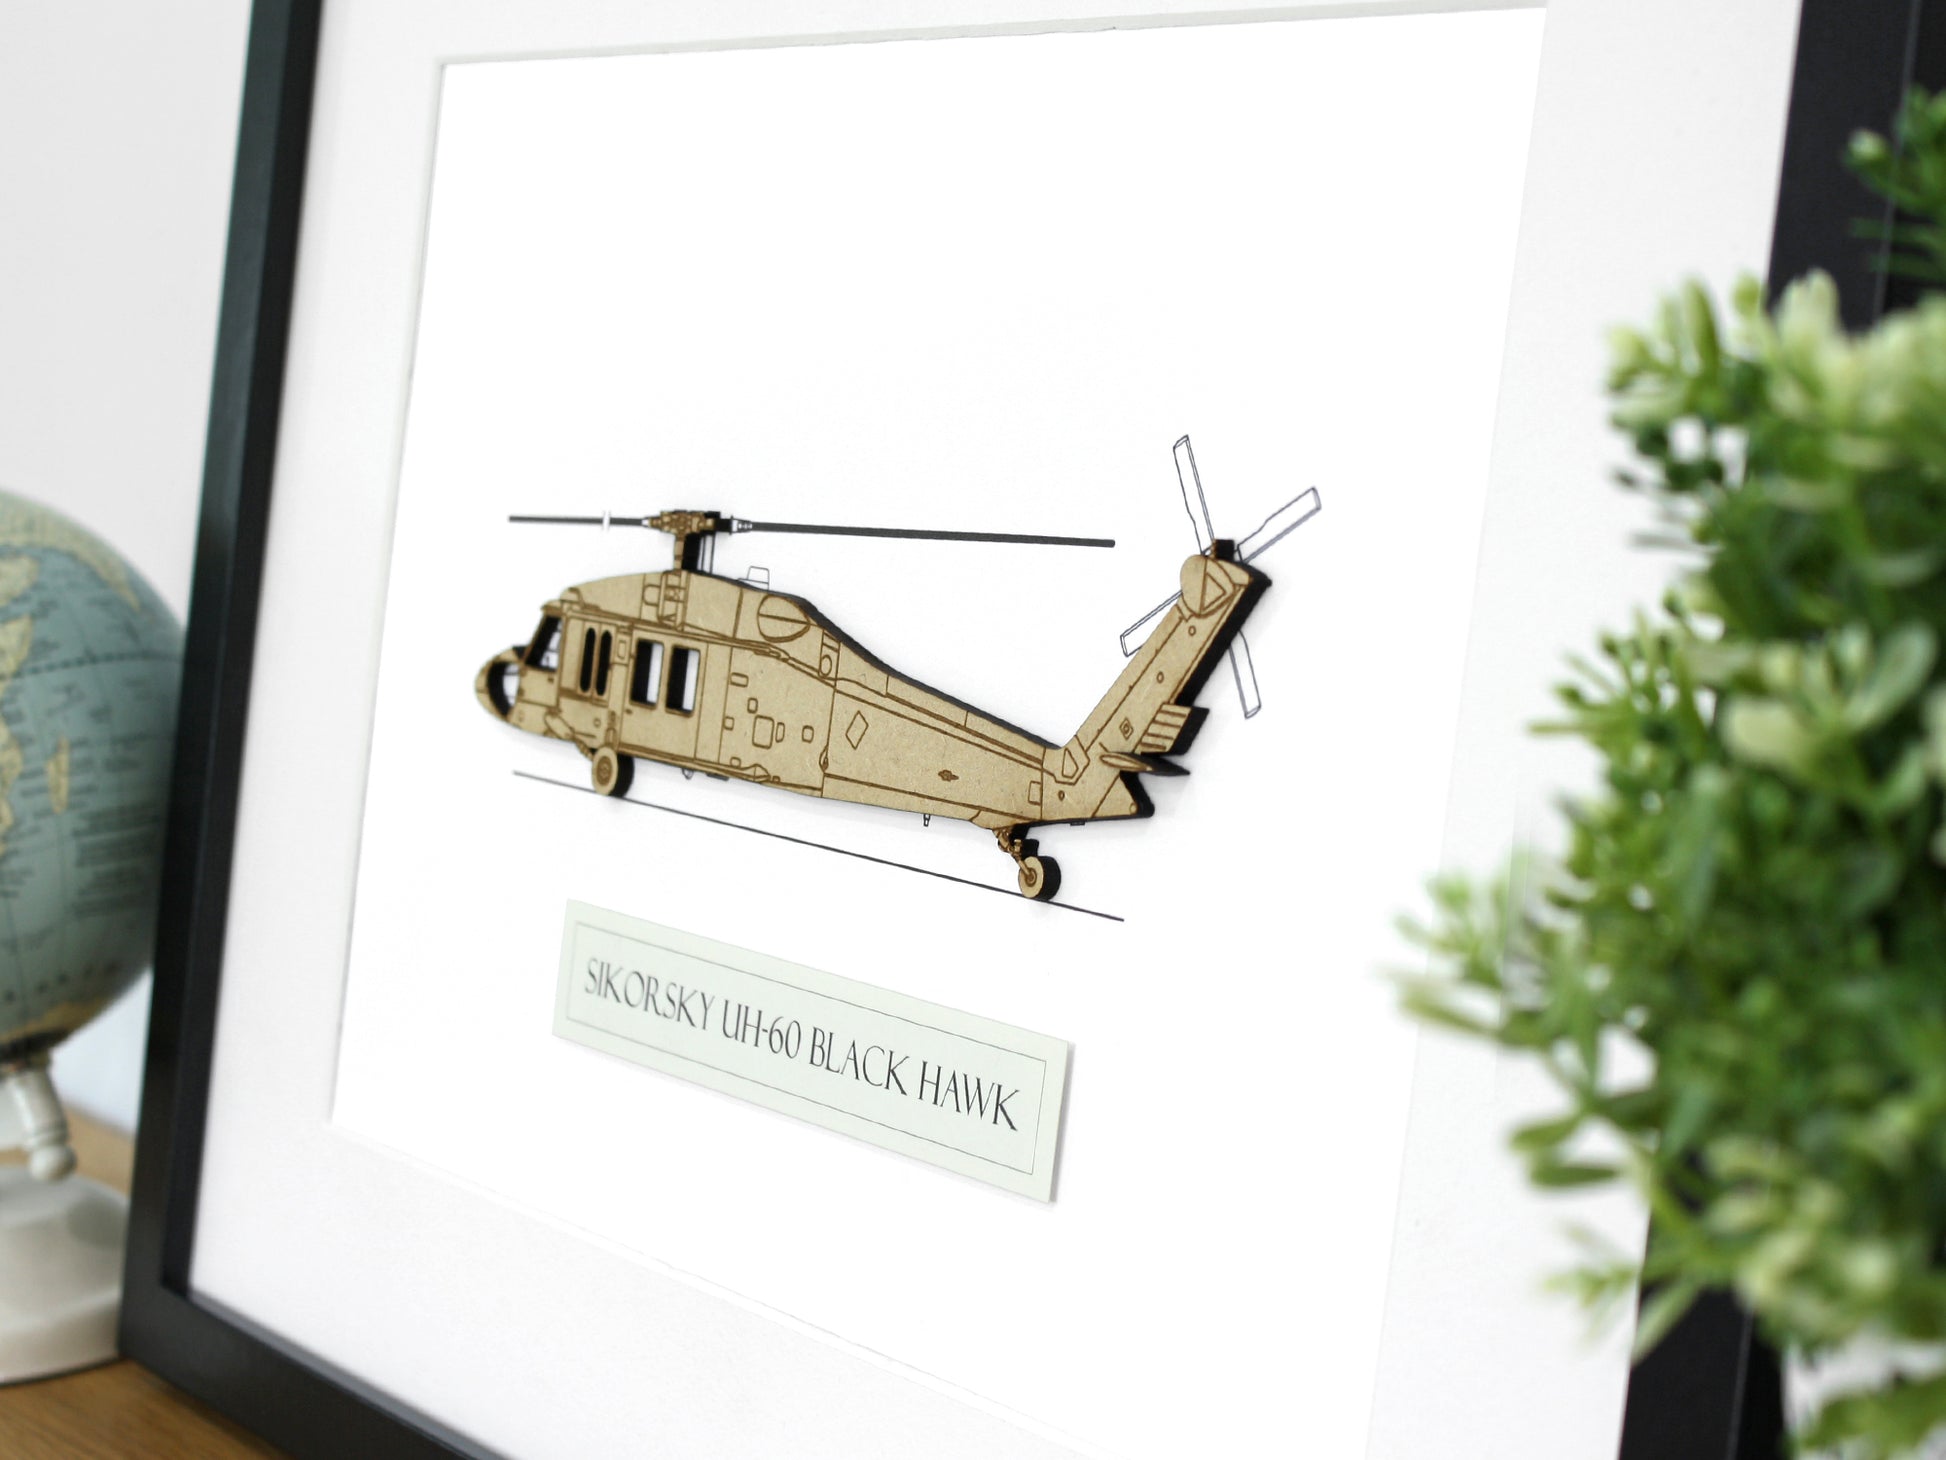 Sikorsky UH-60 Blackhawk helicopter gifts